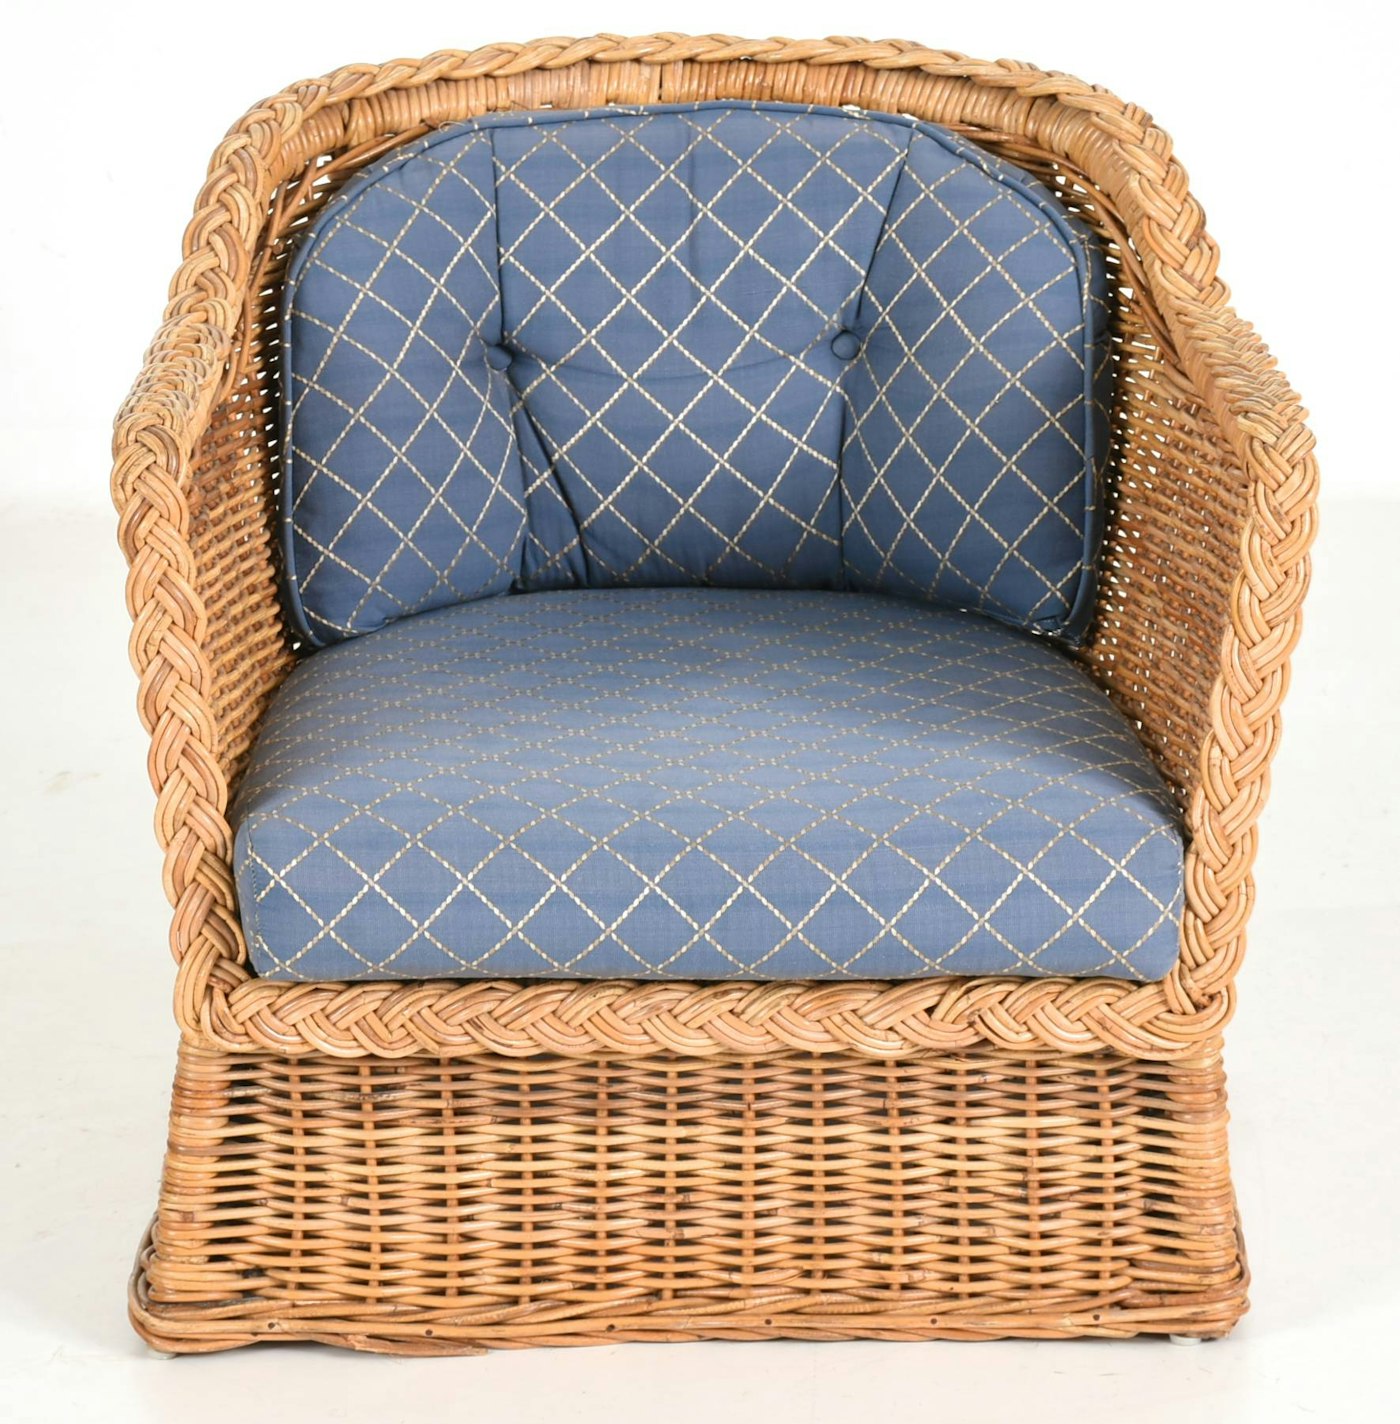 Woven Wicker Accent Chairs | EBTH